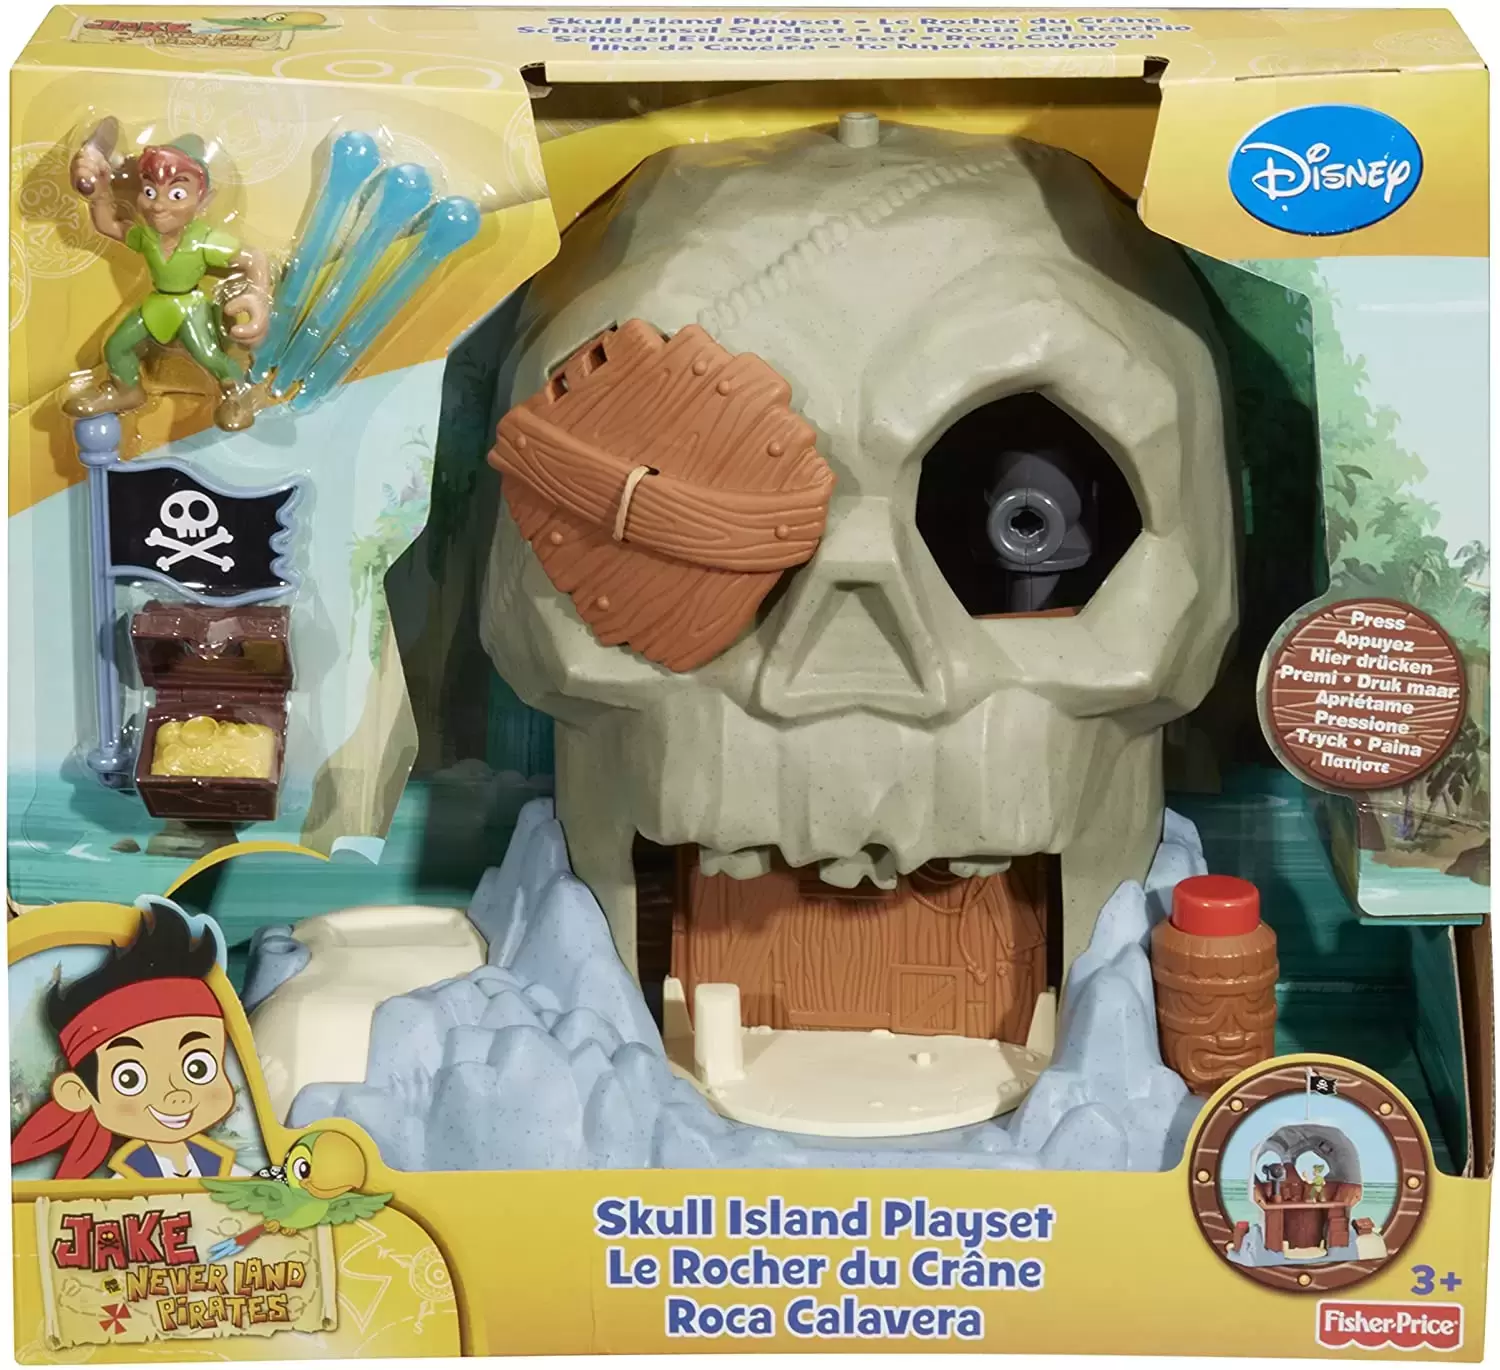 Skull Island Playset - Jakeand The Never Land Pirates - Fisher